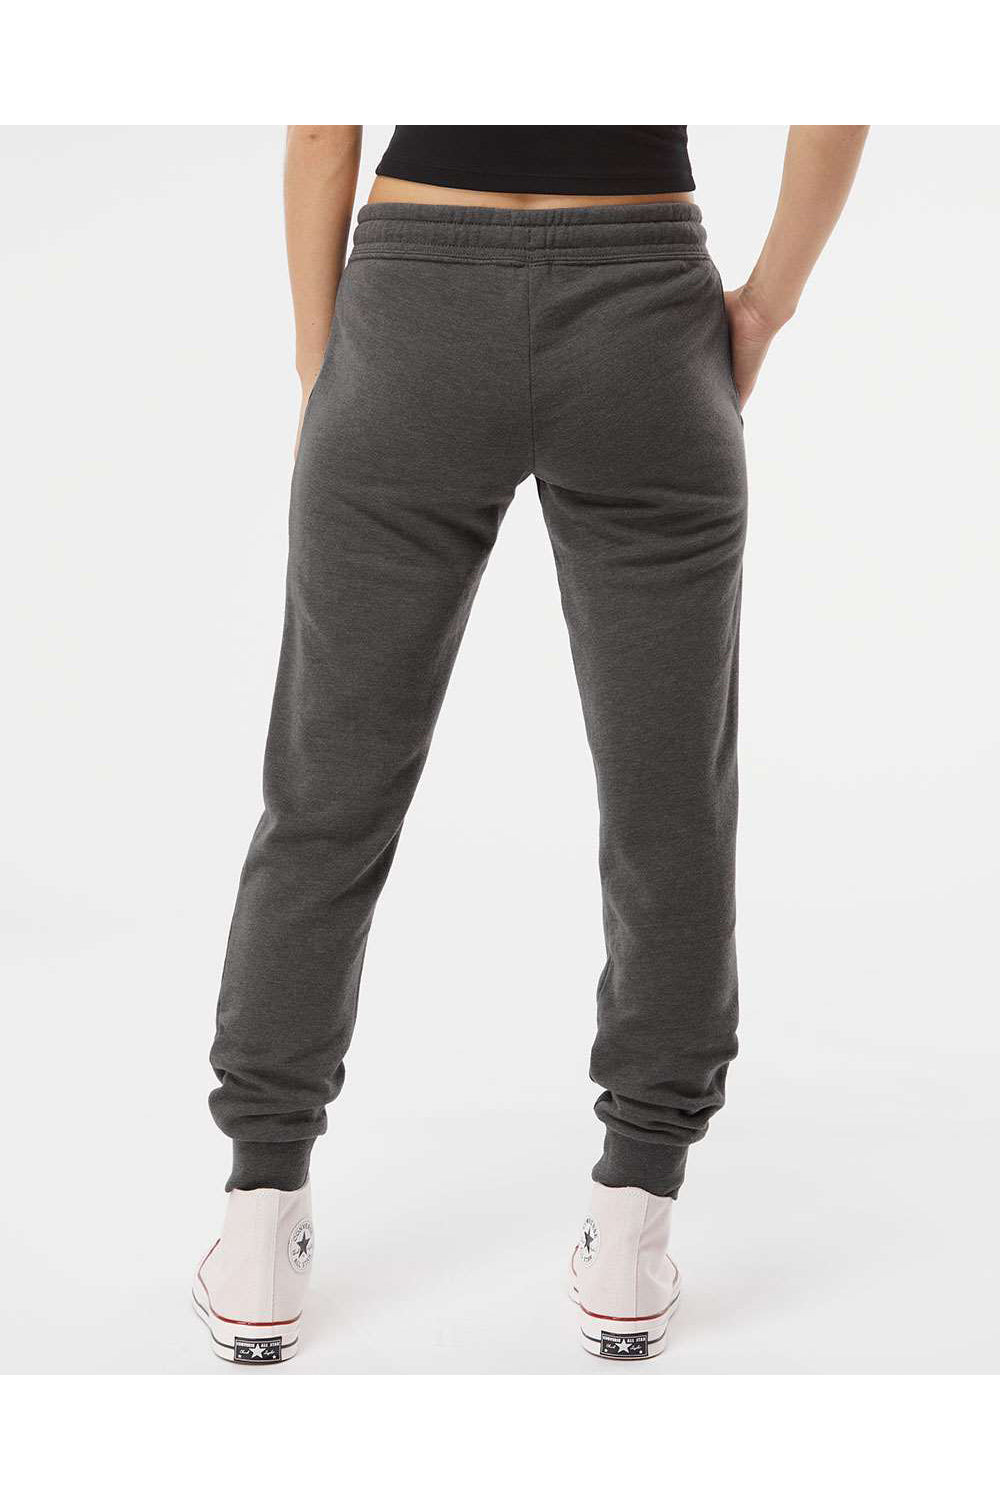 Independent Trading Co. PRM20PNT Womens California Wave Wash Sweatpants w/ Pockets Shadow Grey Model Back